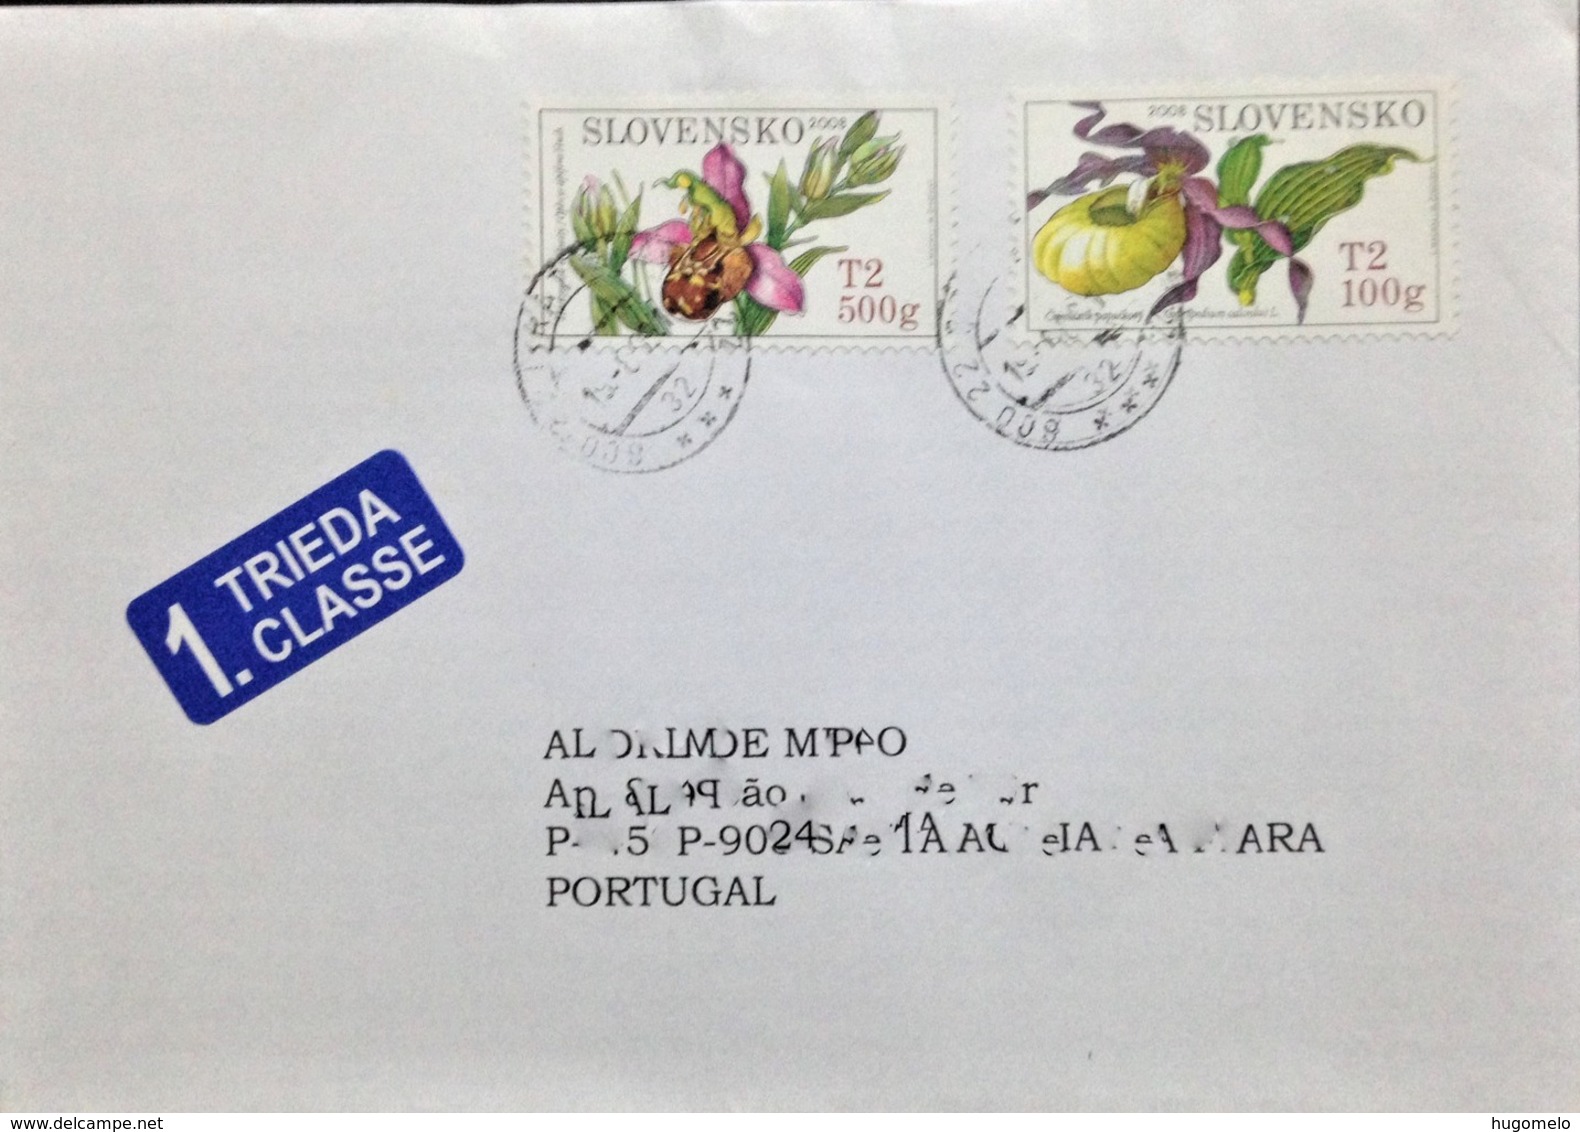 Slovakia, Circulated Cover To Portugal, "Nature", "Flora", Flowers", "Orchids", 2009 - Cartas & Documentos